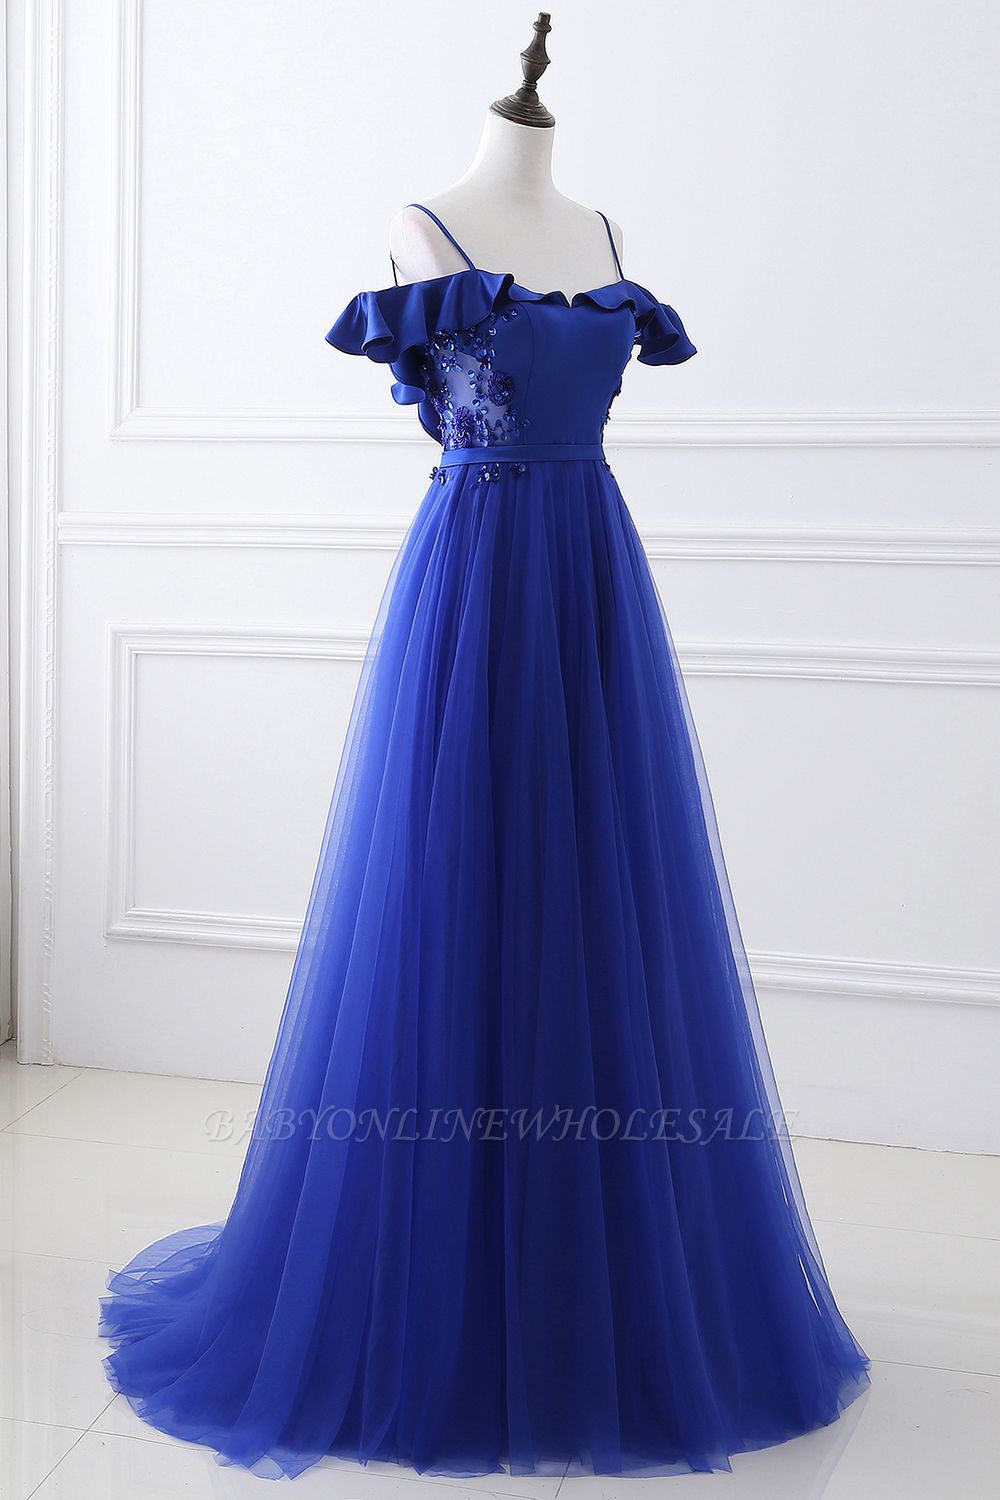 Stunning Off the shoulder blue Tulle ball gown prom dresses ...